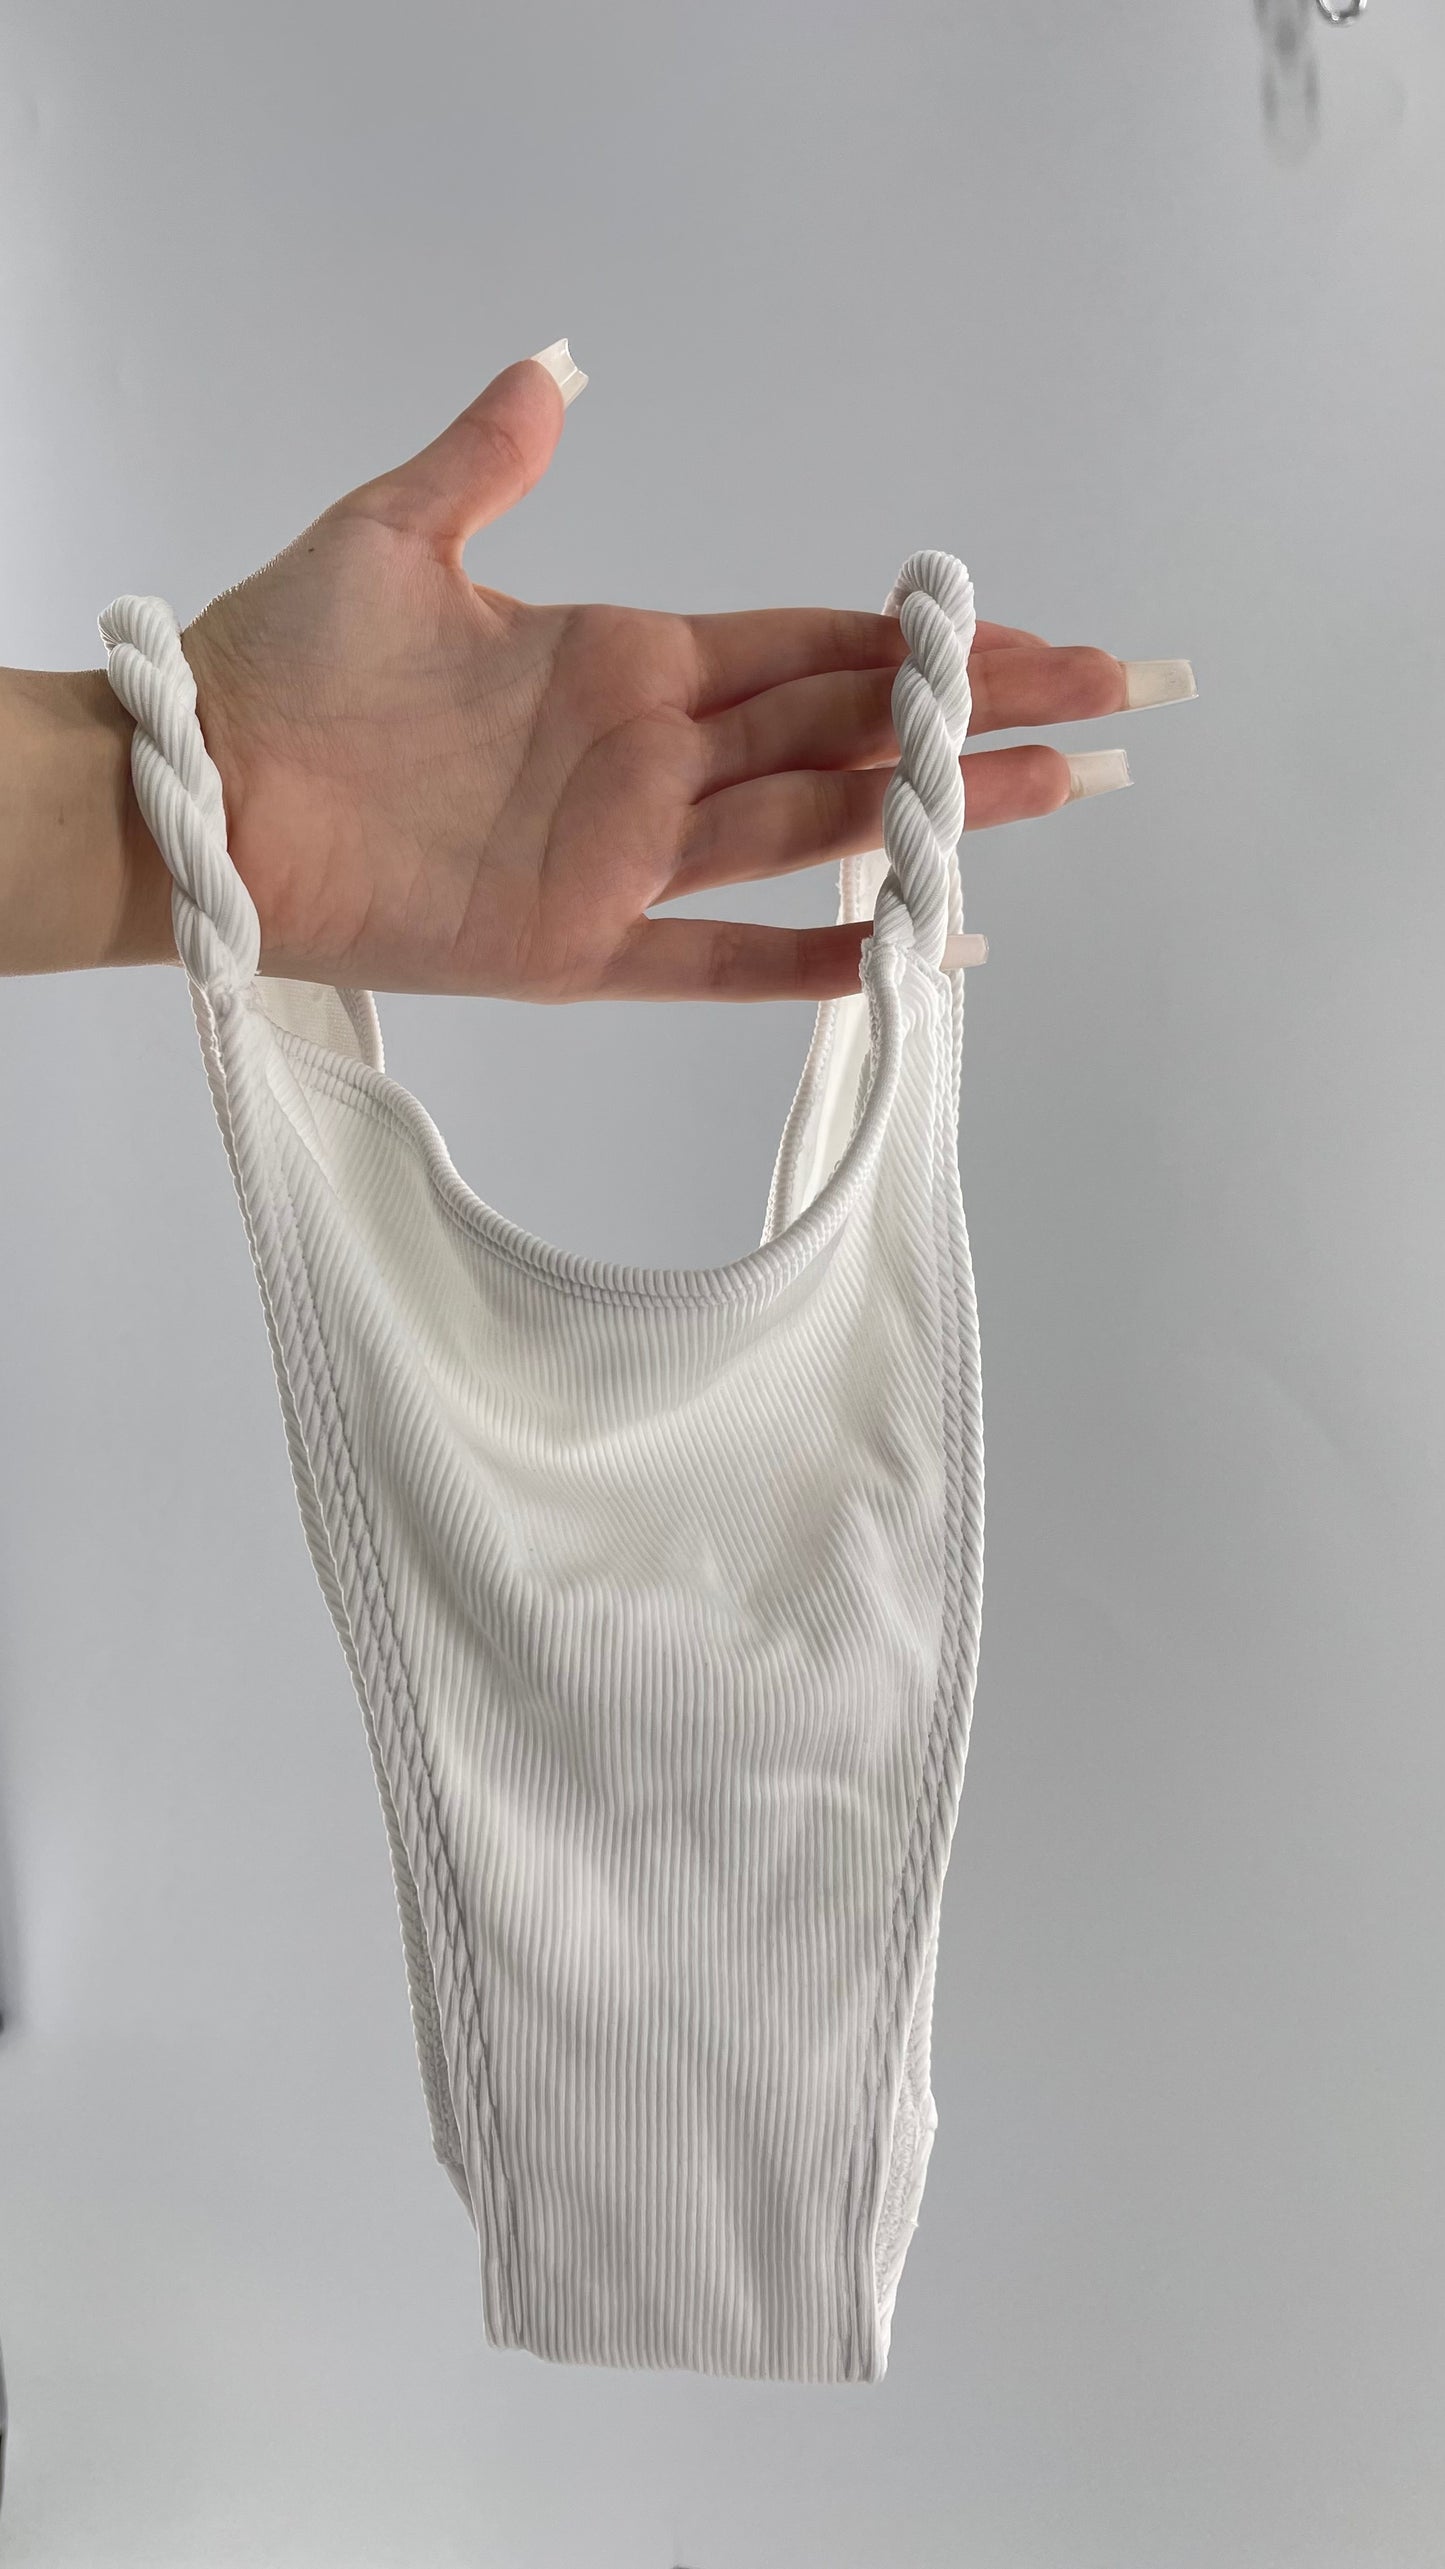 Urban Outfitters Out From Under White Ribbed High Waisted Cheeky Swim Bottoms with Braided Straps (Medium)